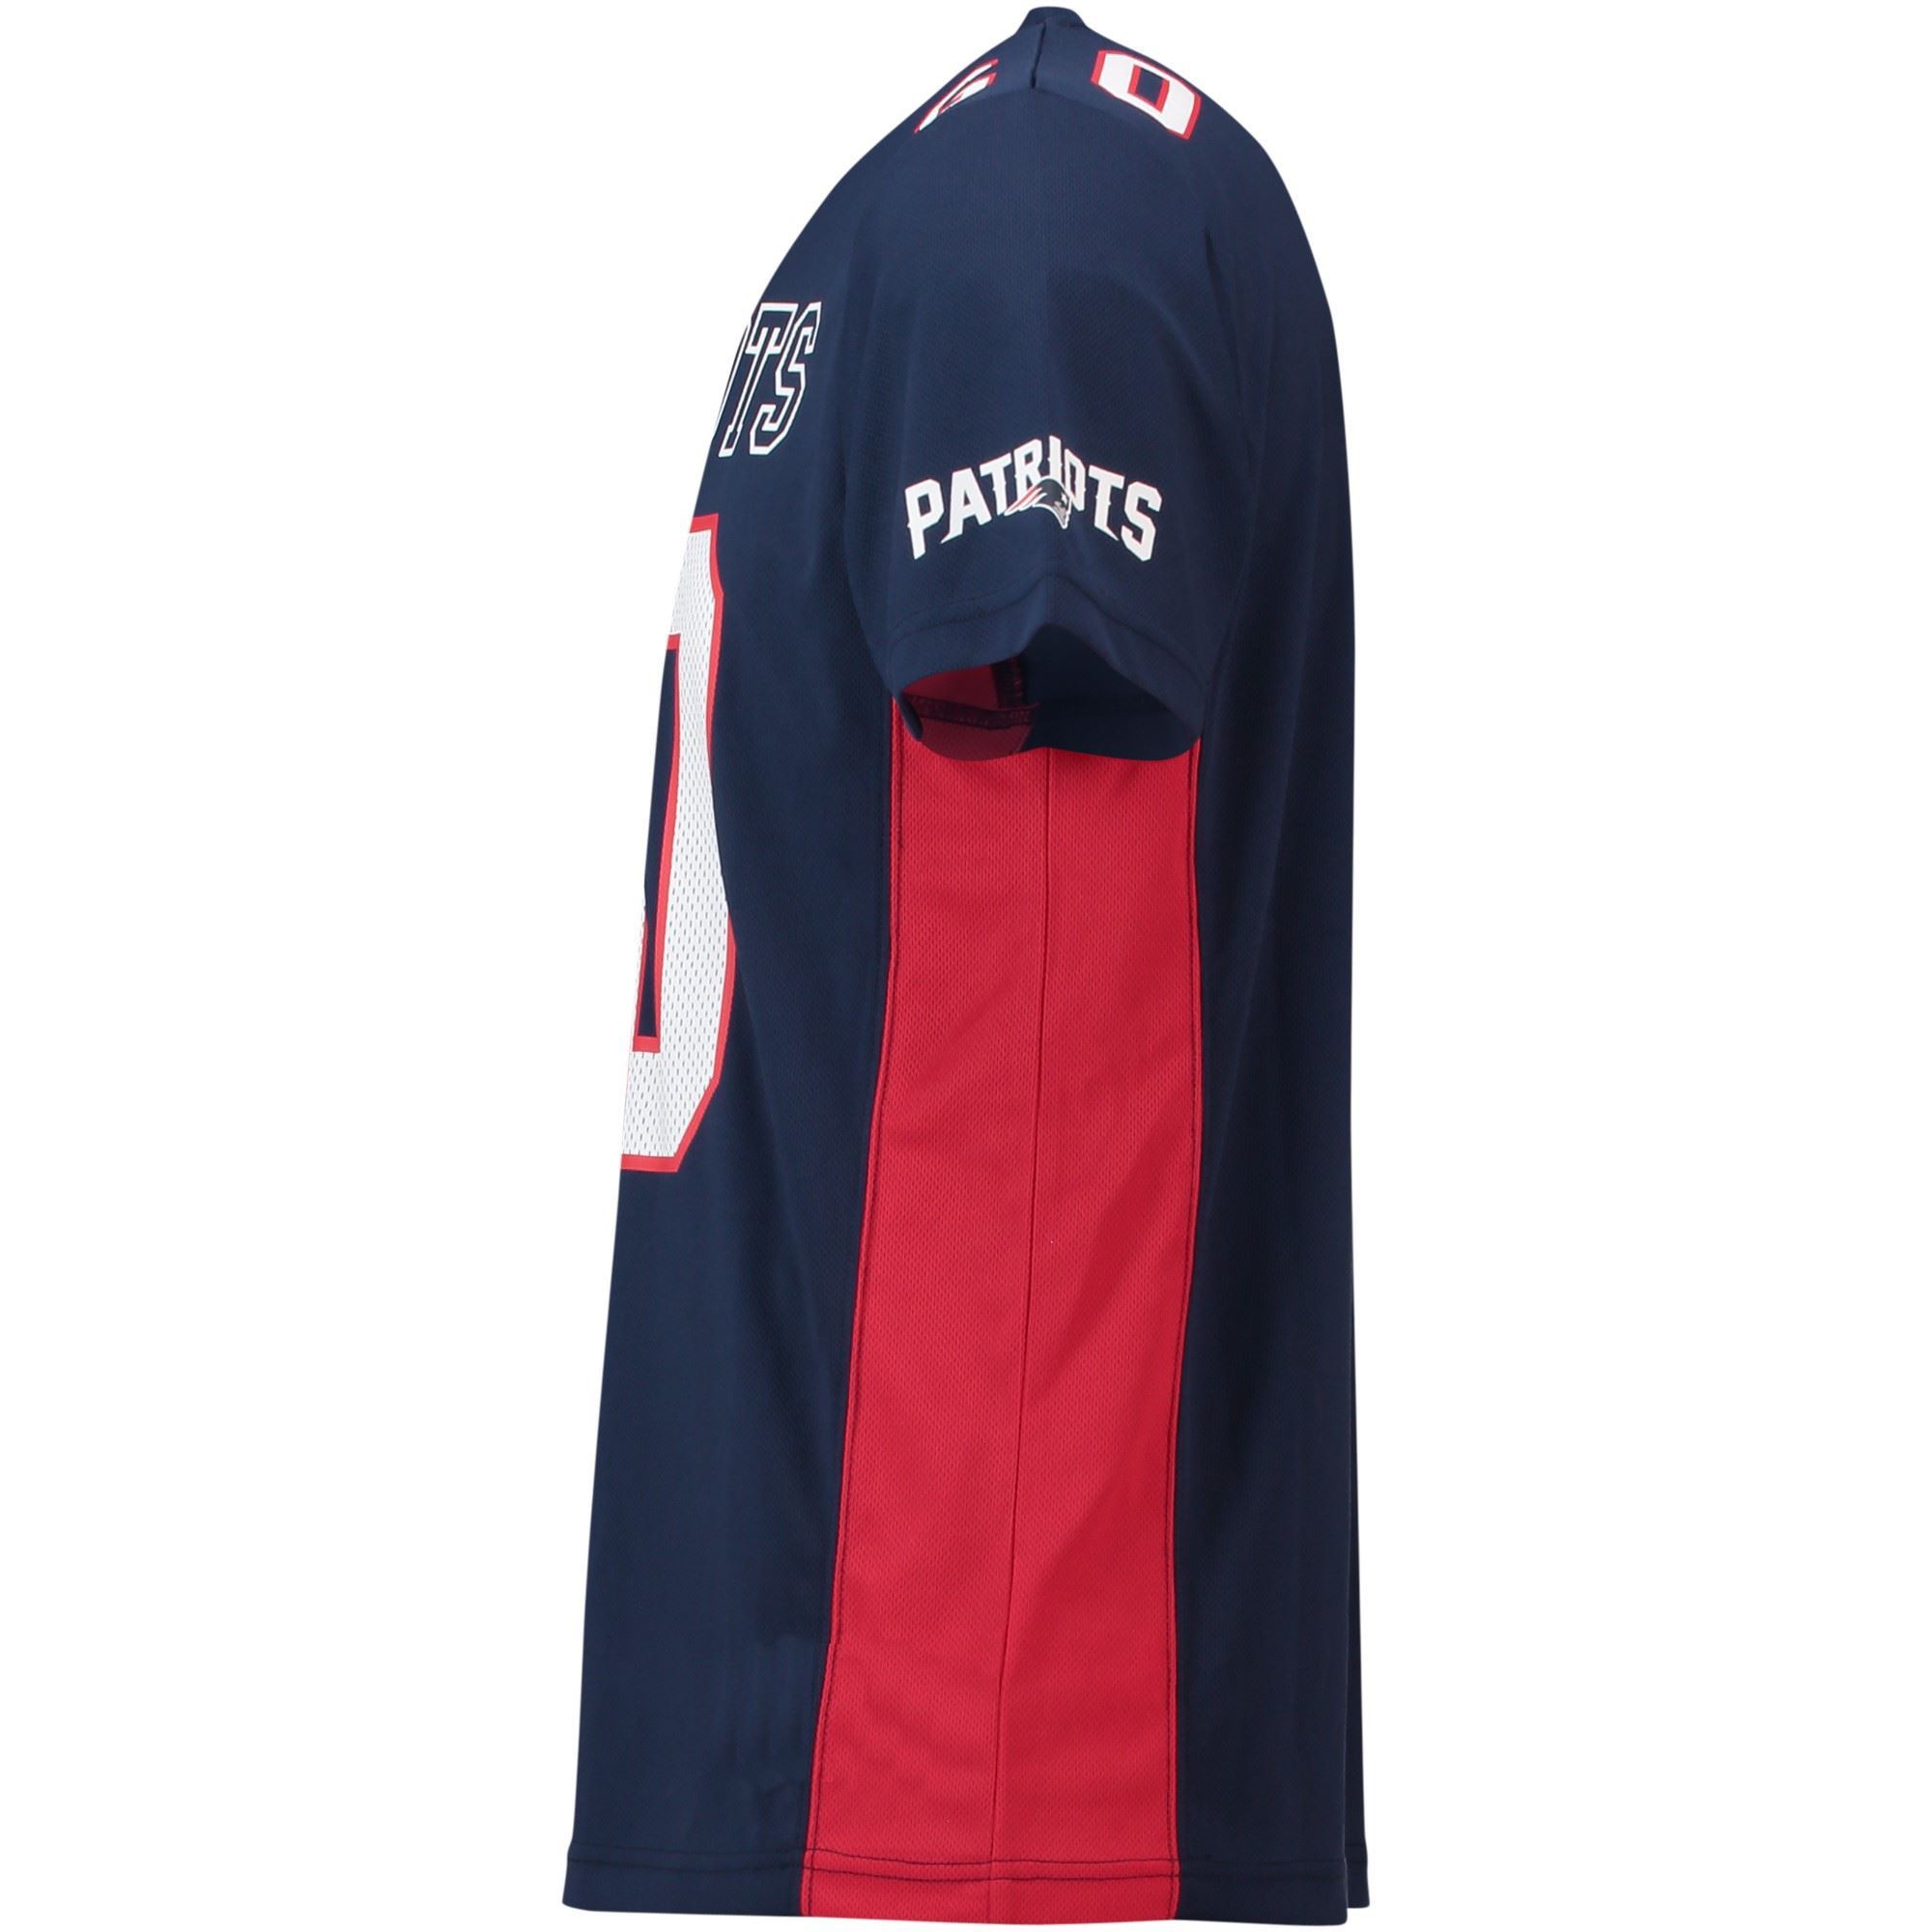 New England Patriots Navy NFL Poly Mesh Supporters Jersey Fanatics